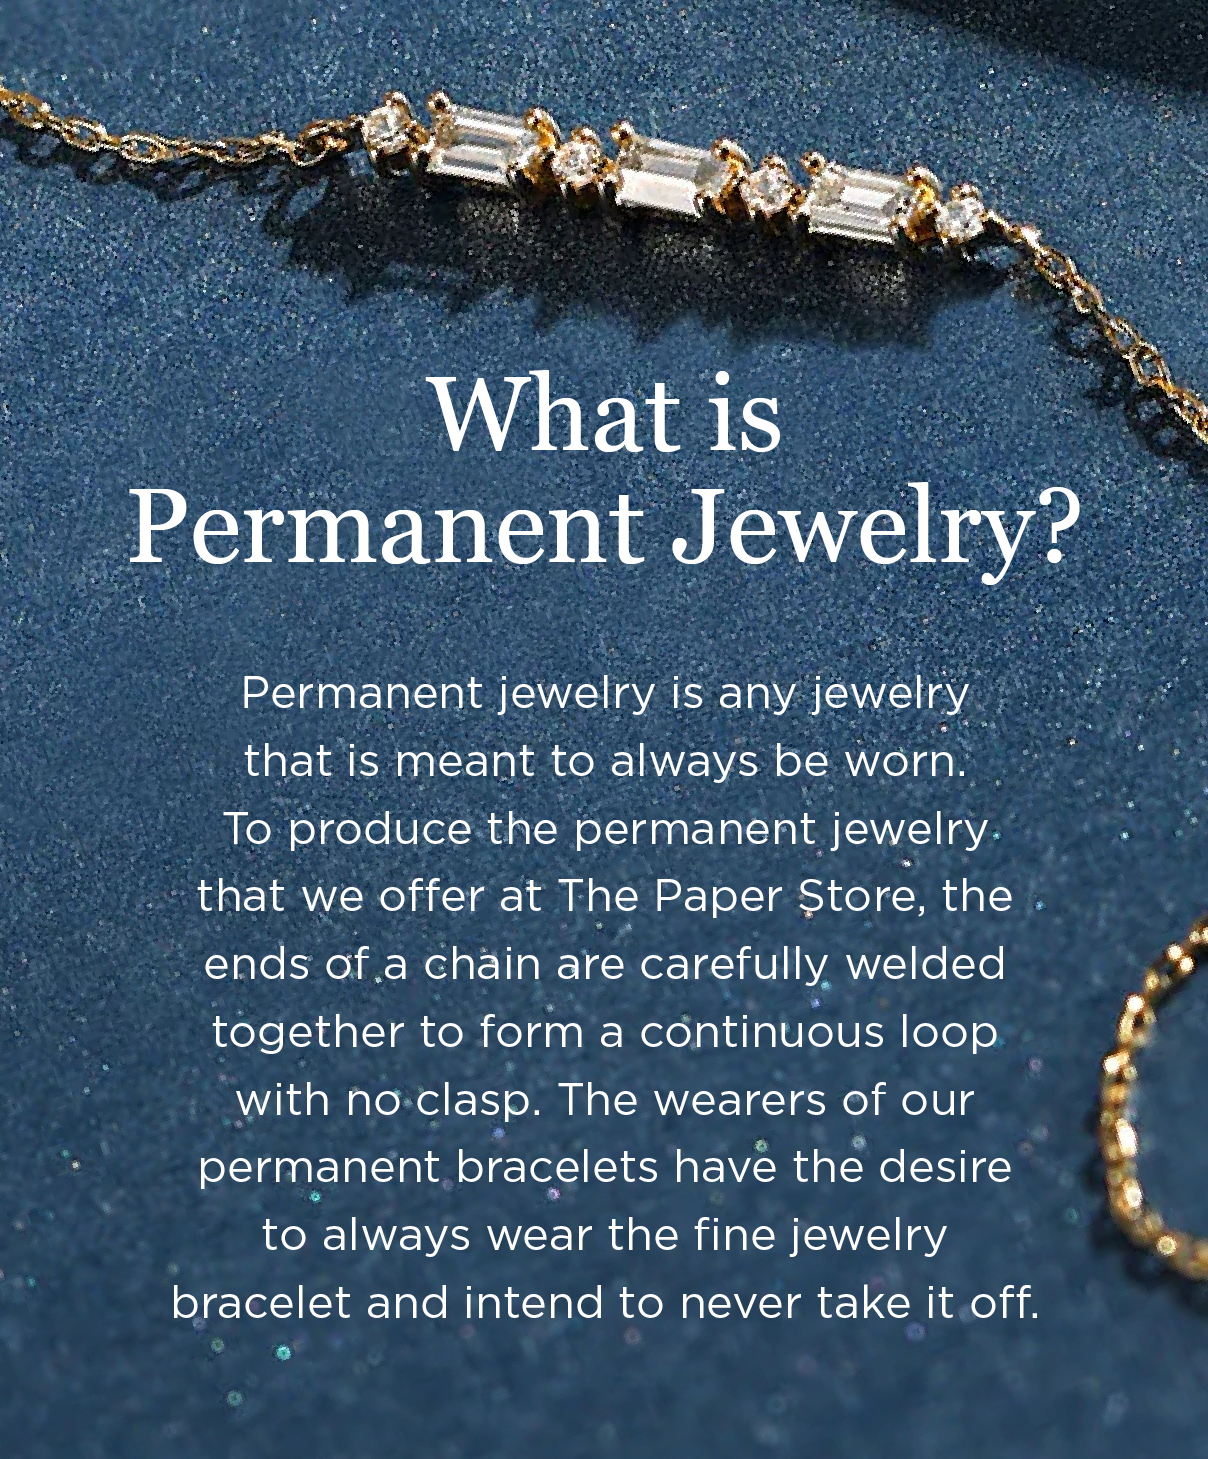 Permanent Jewelry - Essential Tools & Supplies